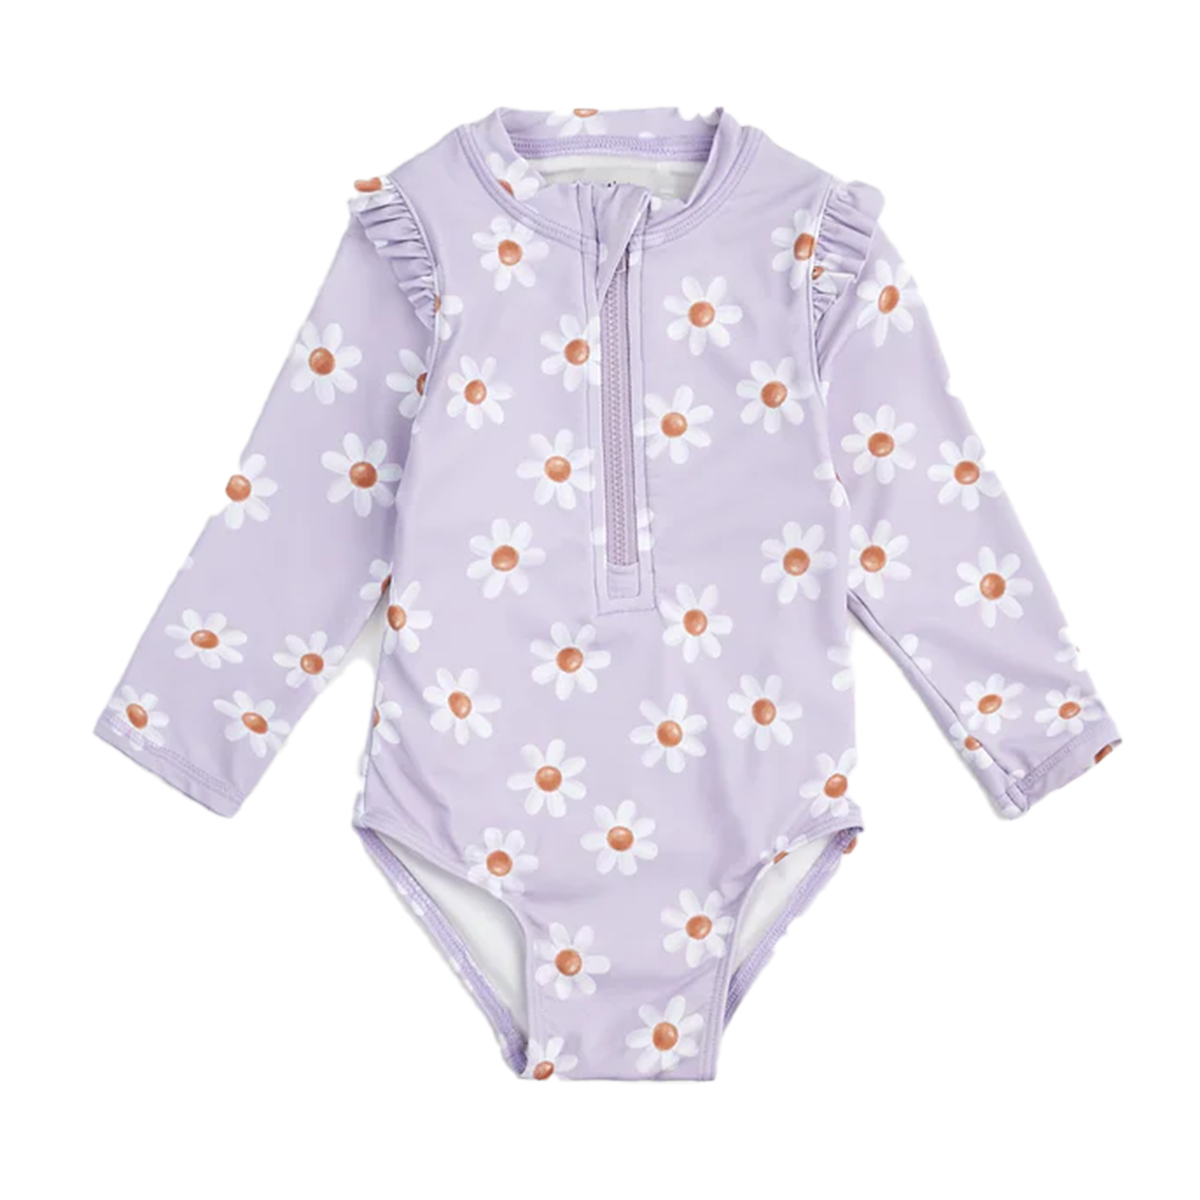 Daisy Print Toddler Girl's Lavender One-Piece Long Sleeve Swimsuit